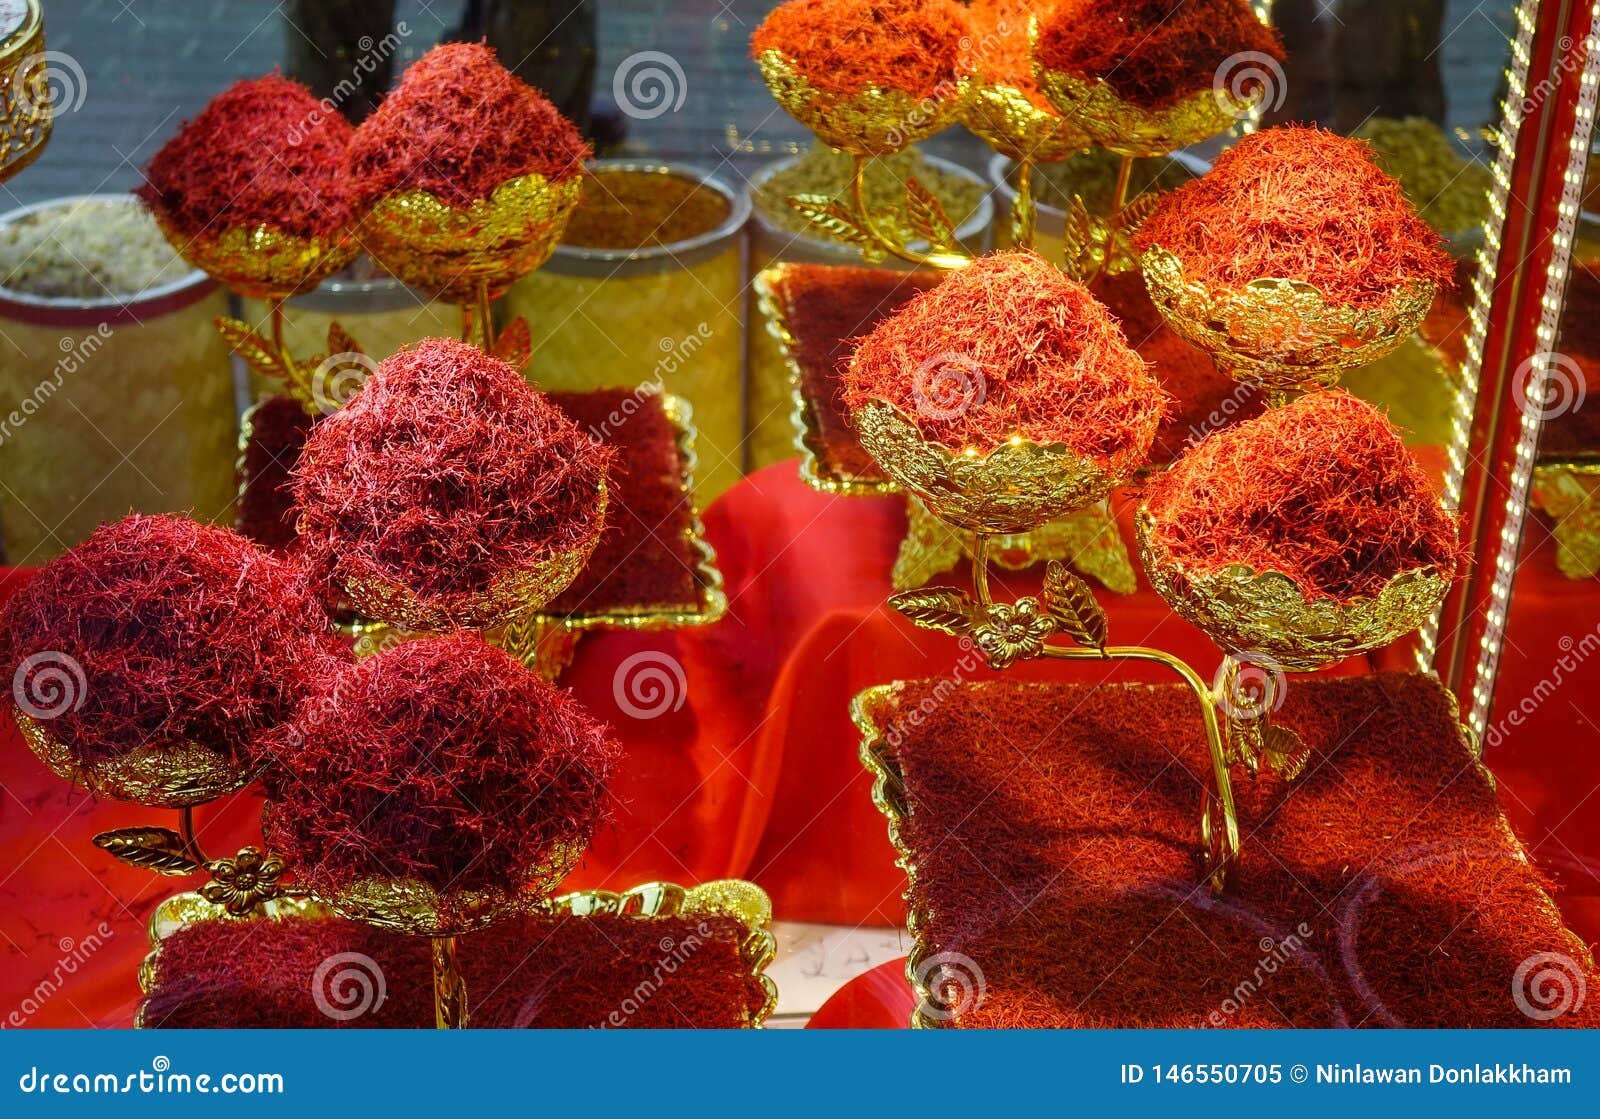 Saffron Spice For Sale At The Shop Stock Image - Image of aromatic, aroma:  146550705